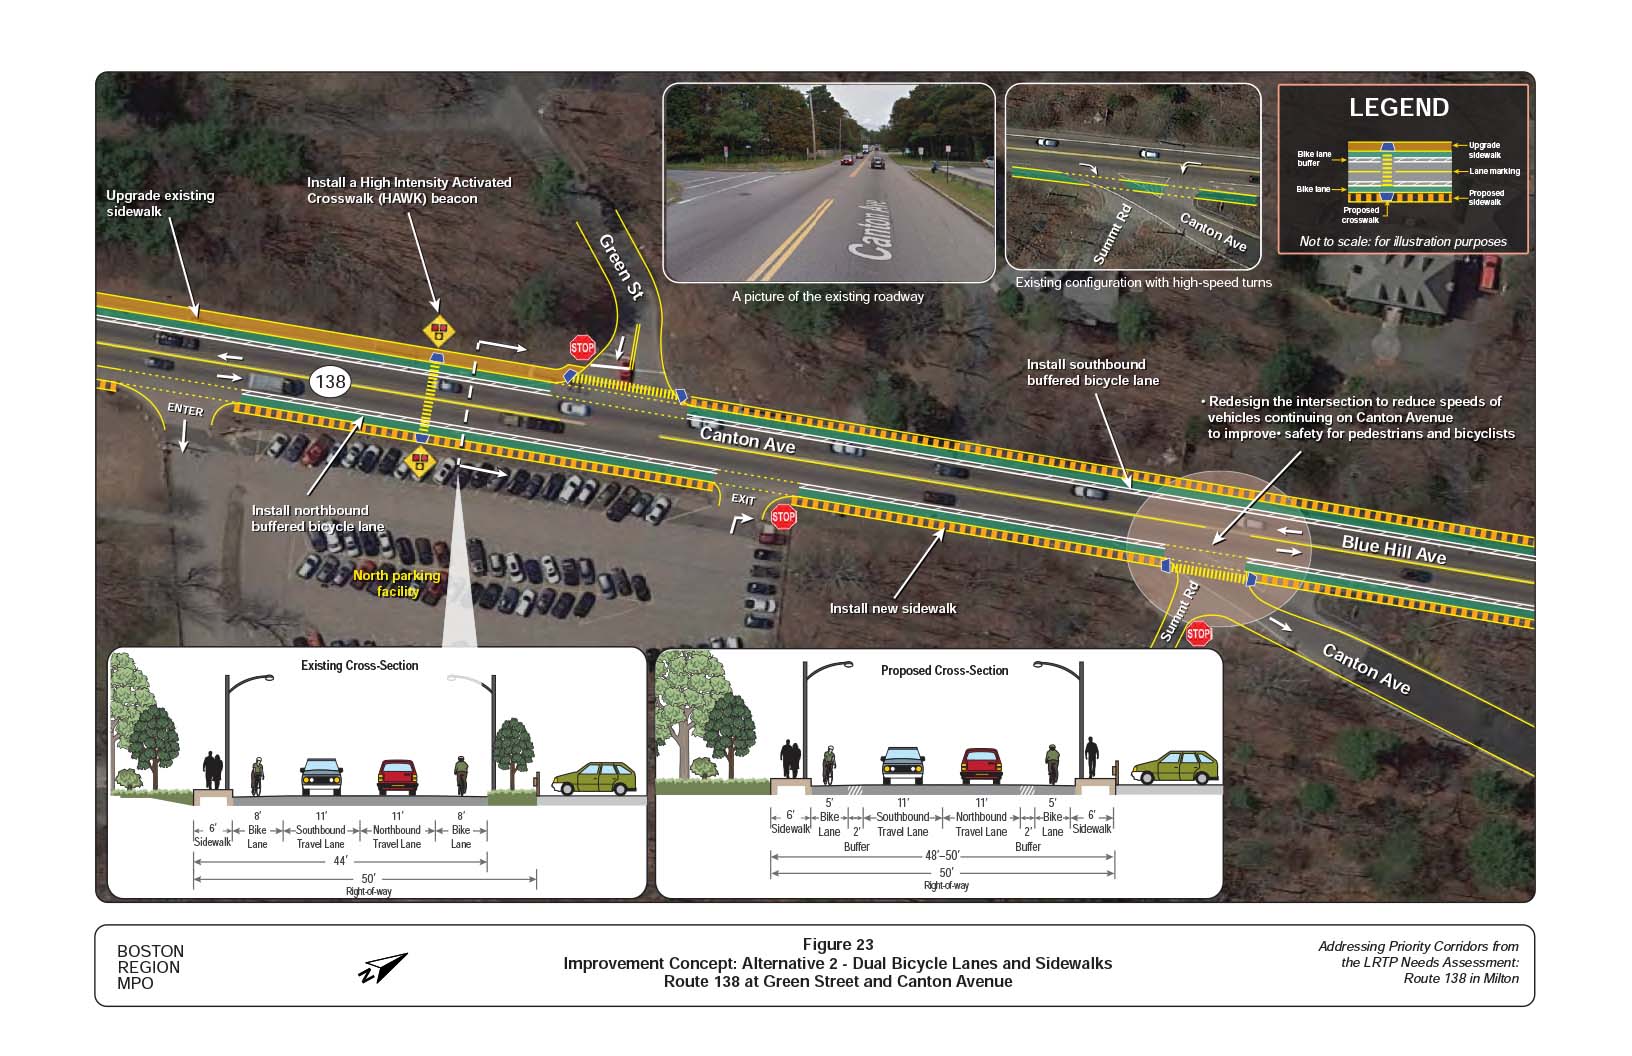 Figure 23 is an aerial photo of Route 138 near Green Street and canton Avenue showing Alternative 2, dual bicycle lanes and sidewalks; and overlays showing the existing and proposed cross sections.